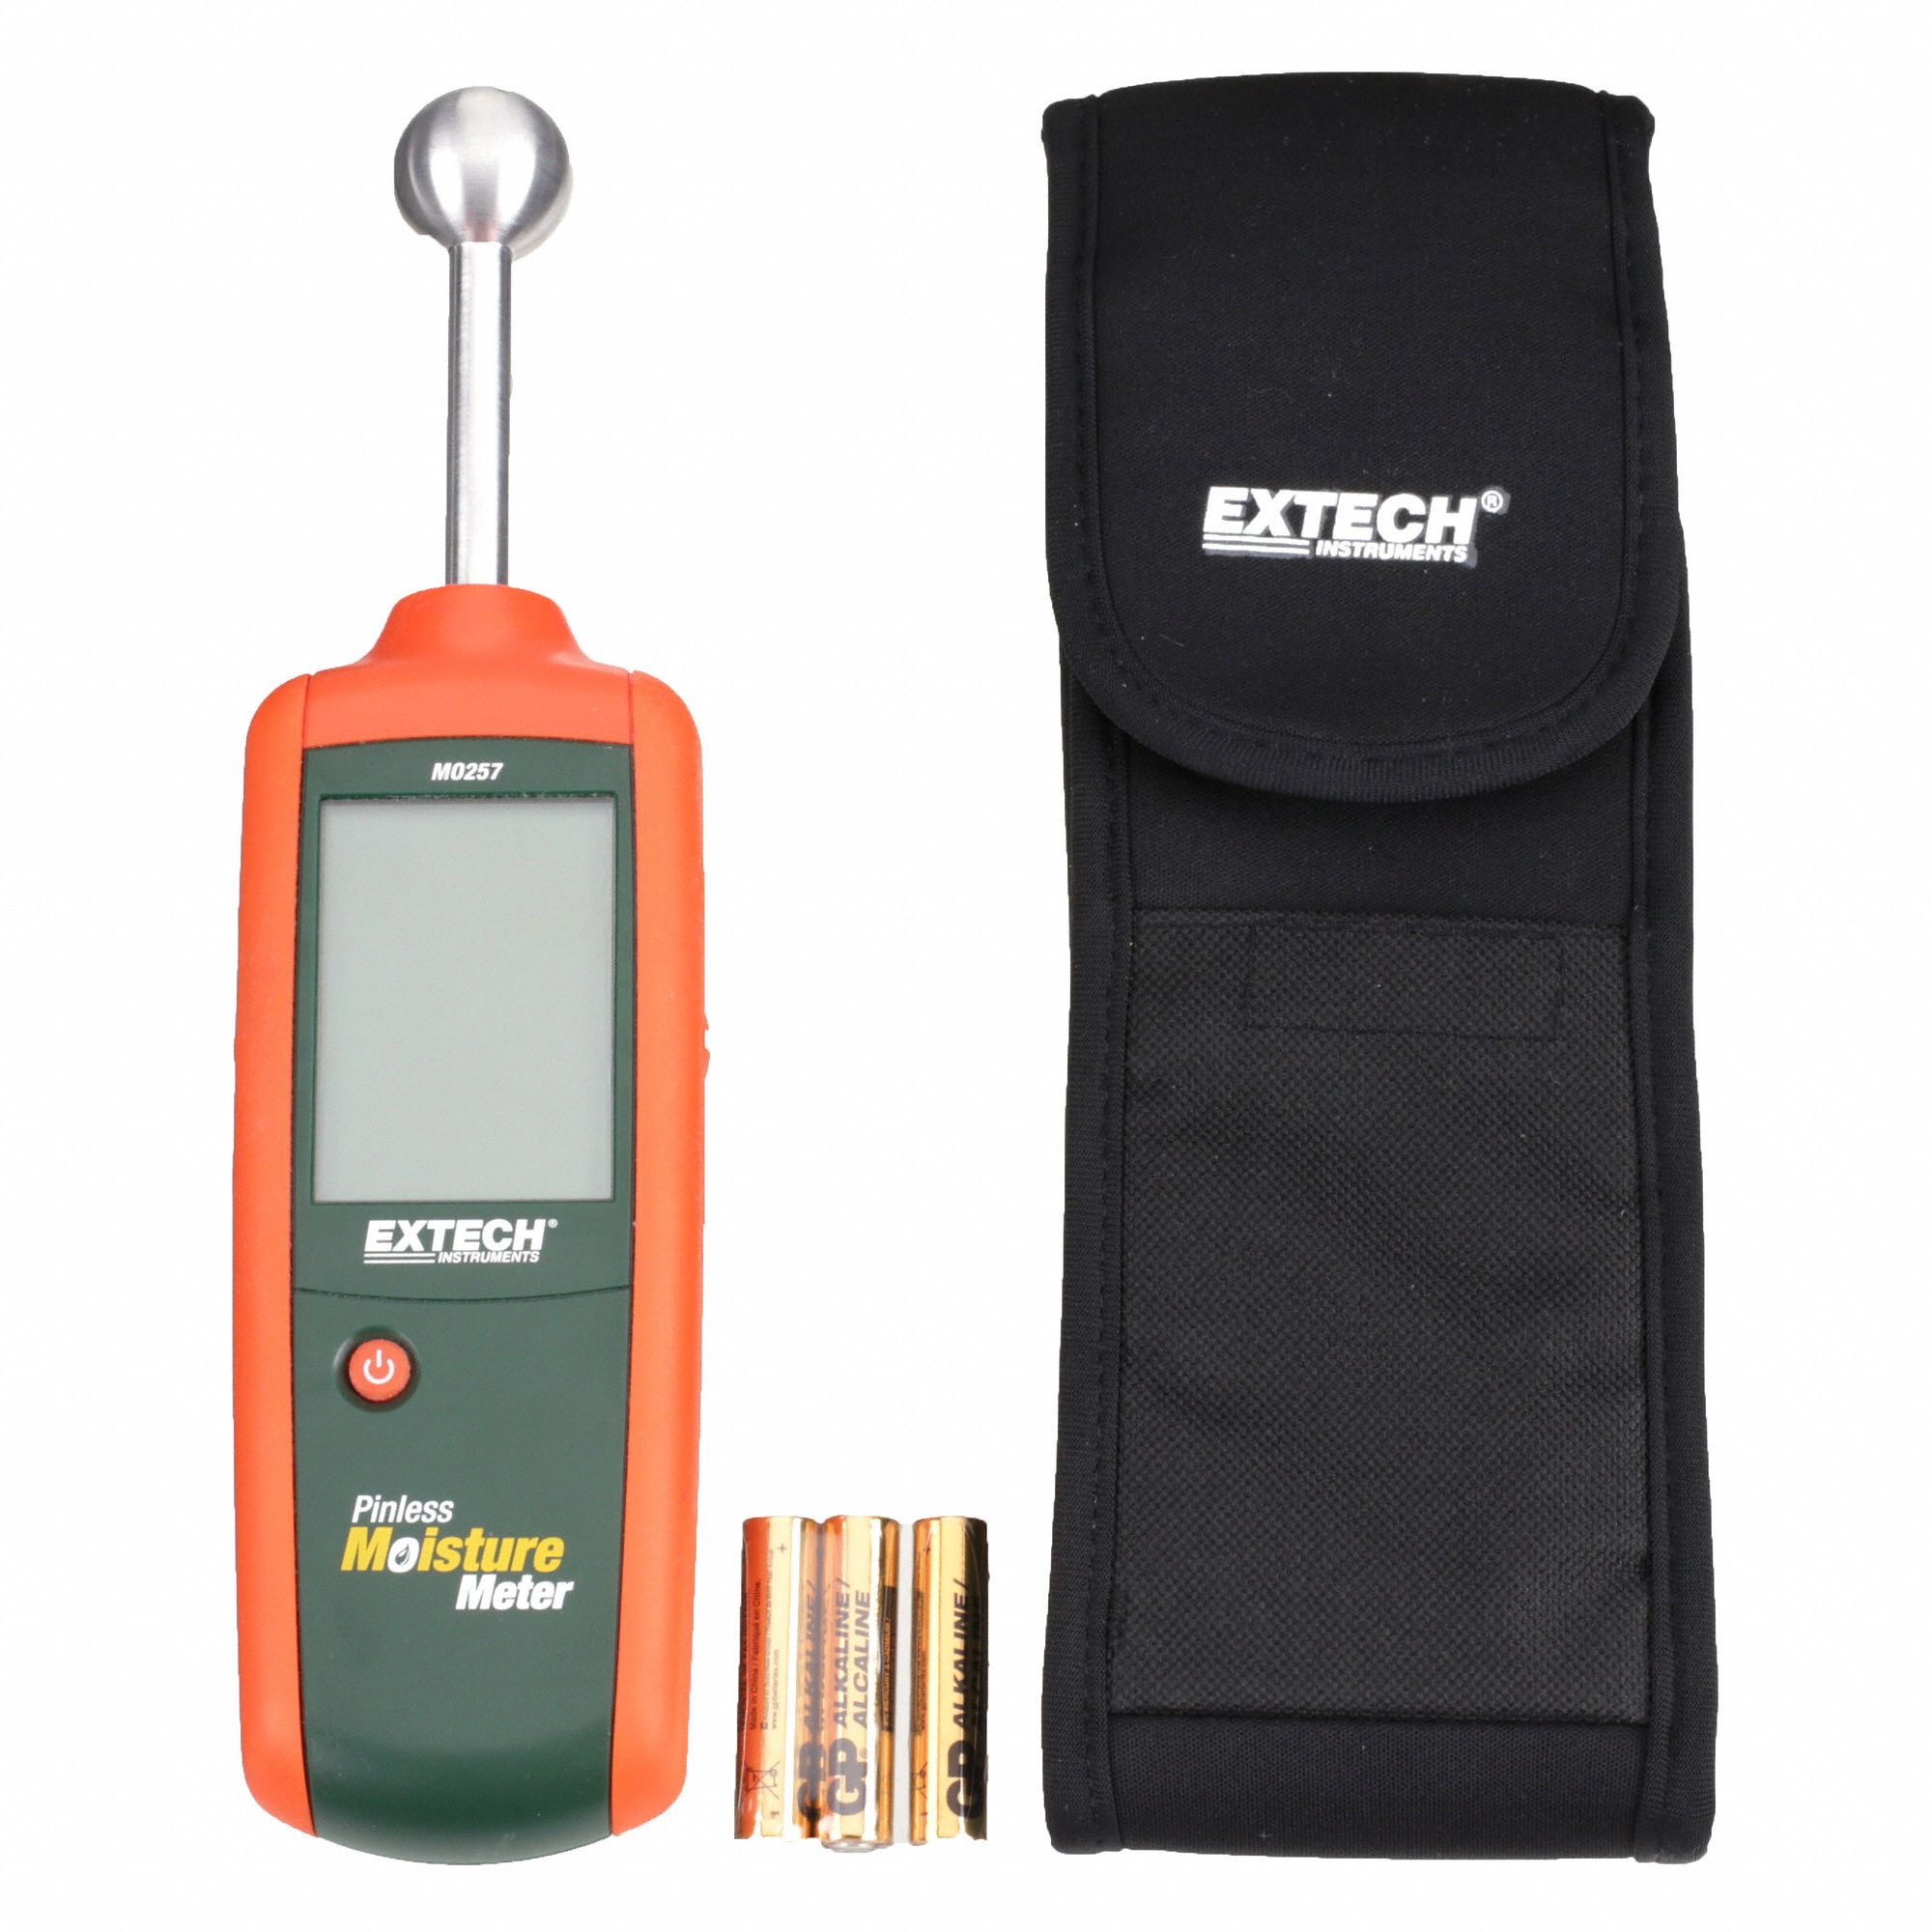 Extech MO257 Pinless Moisture Meter with Non-Invasive Measurements